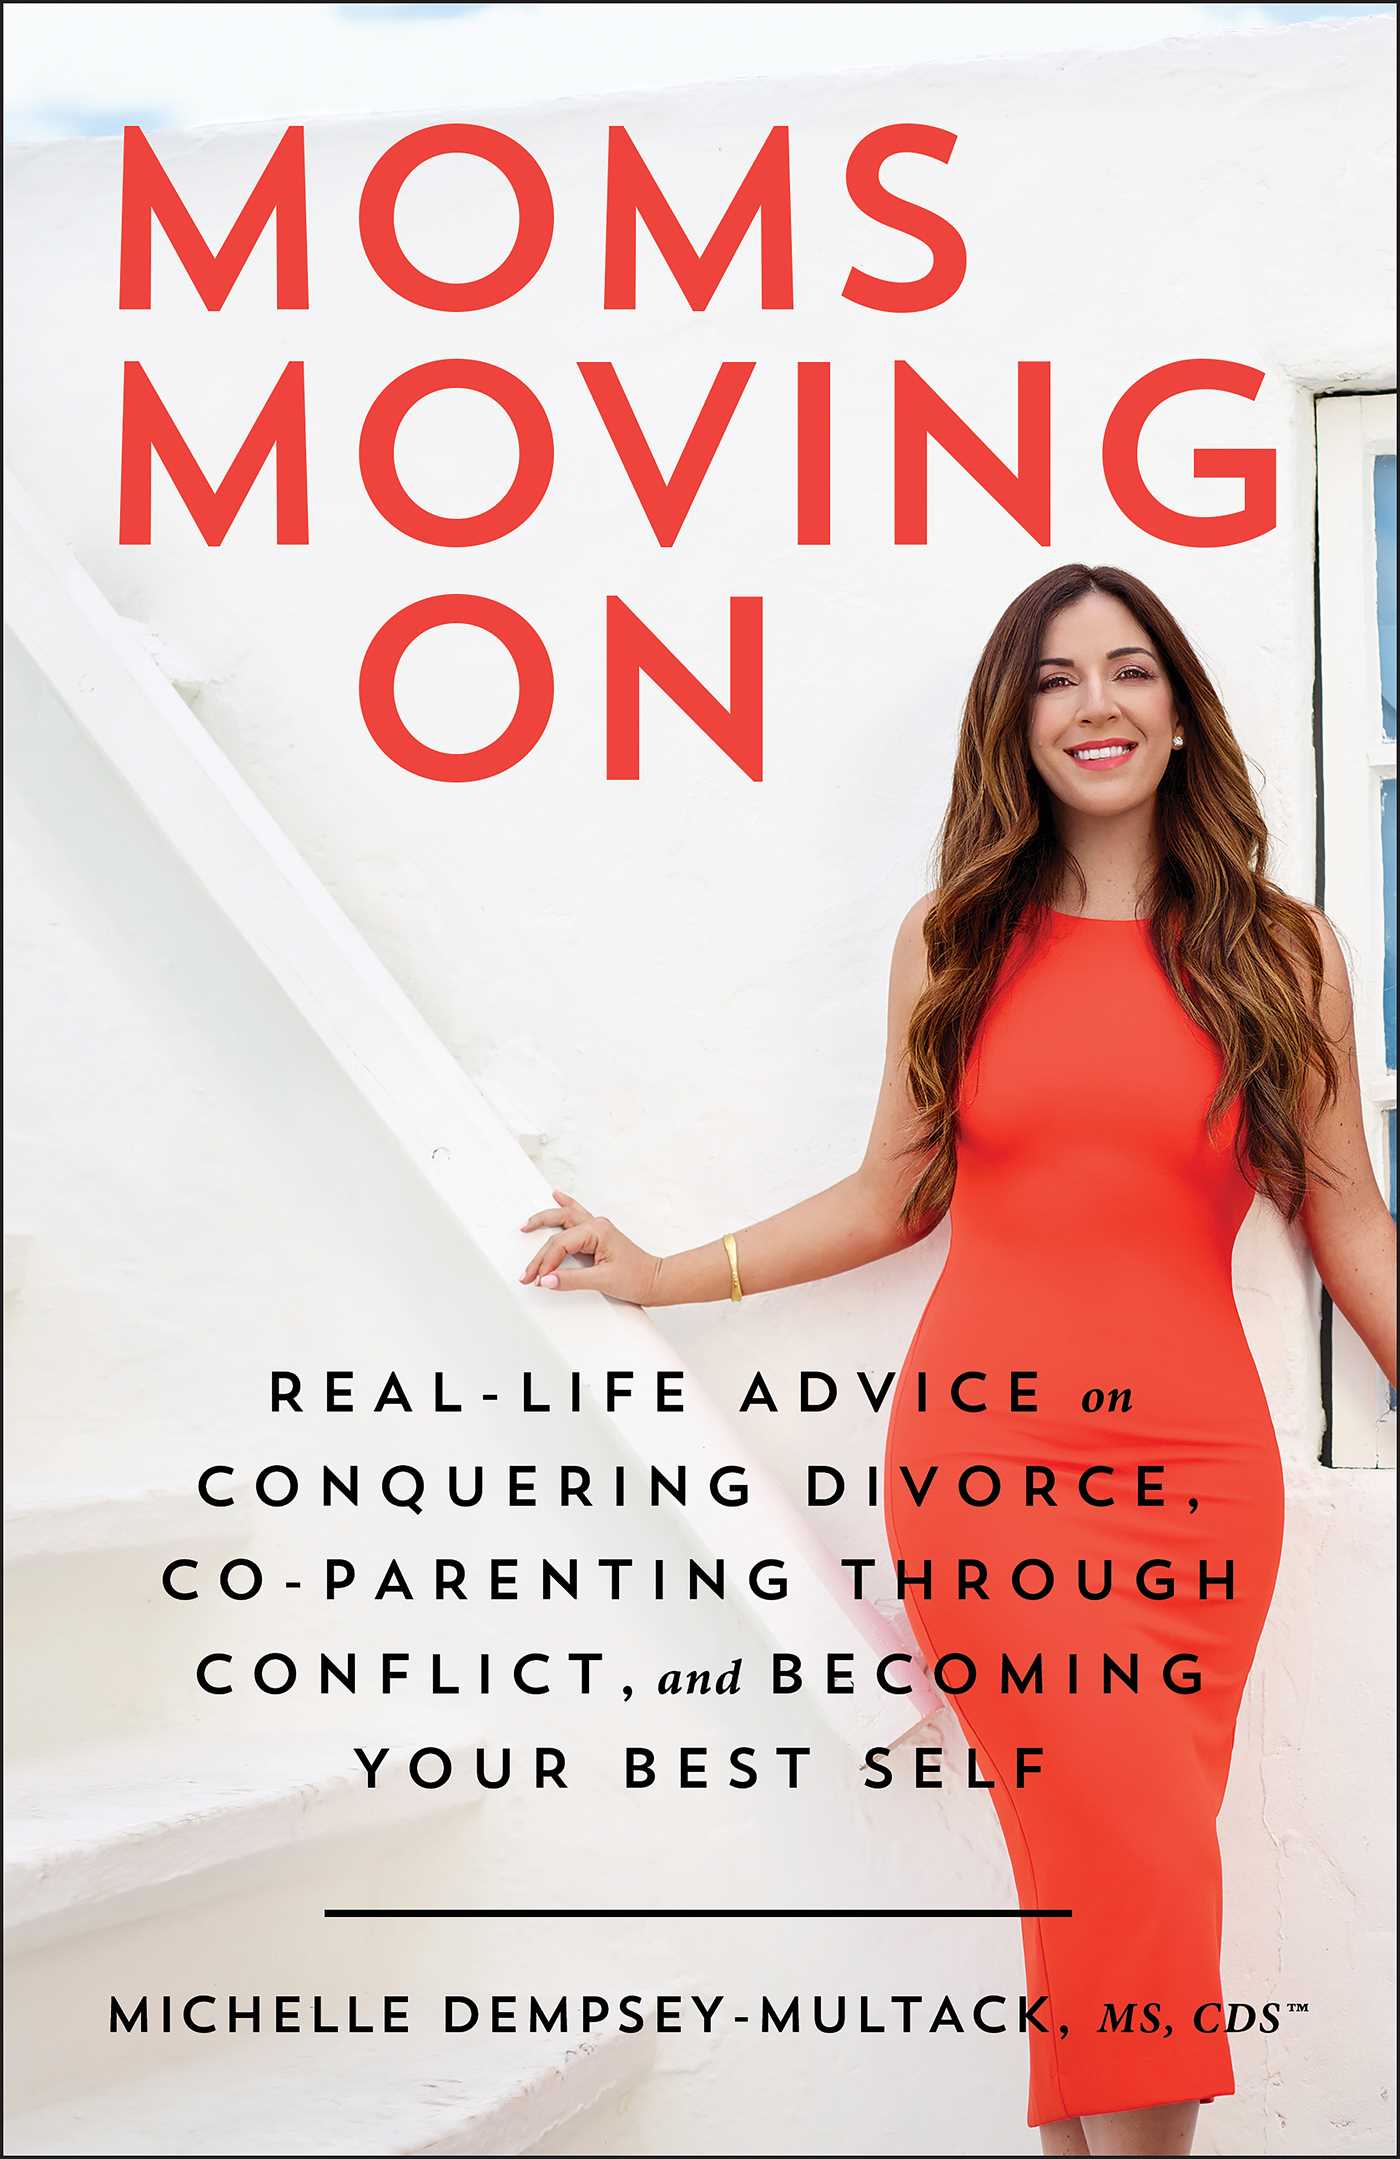 Moms Moving On : Real-Life Advice on Conquering Divorce, Co-Parenting Through Conflict, and Becoming Your Best Self | Dempsey-Multack, Michelle (Auteur)